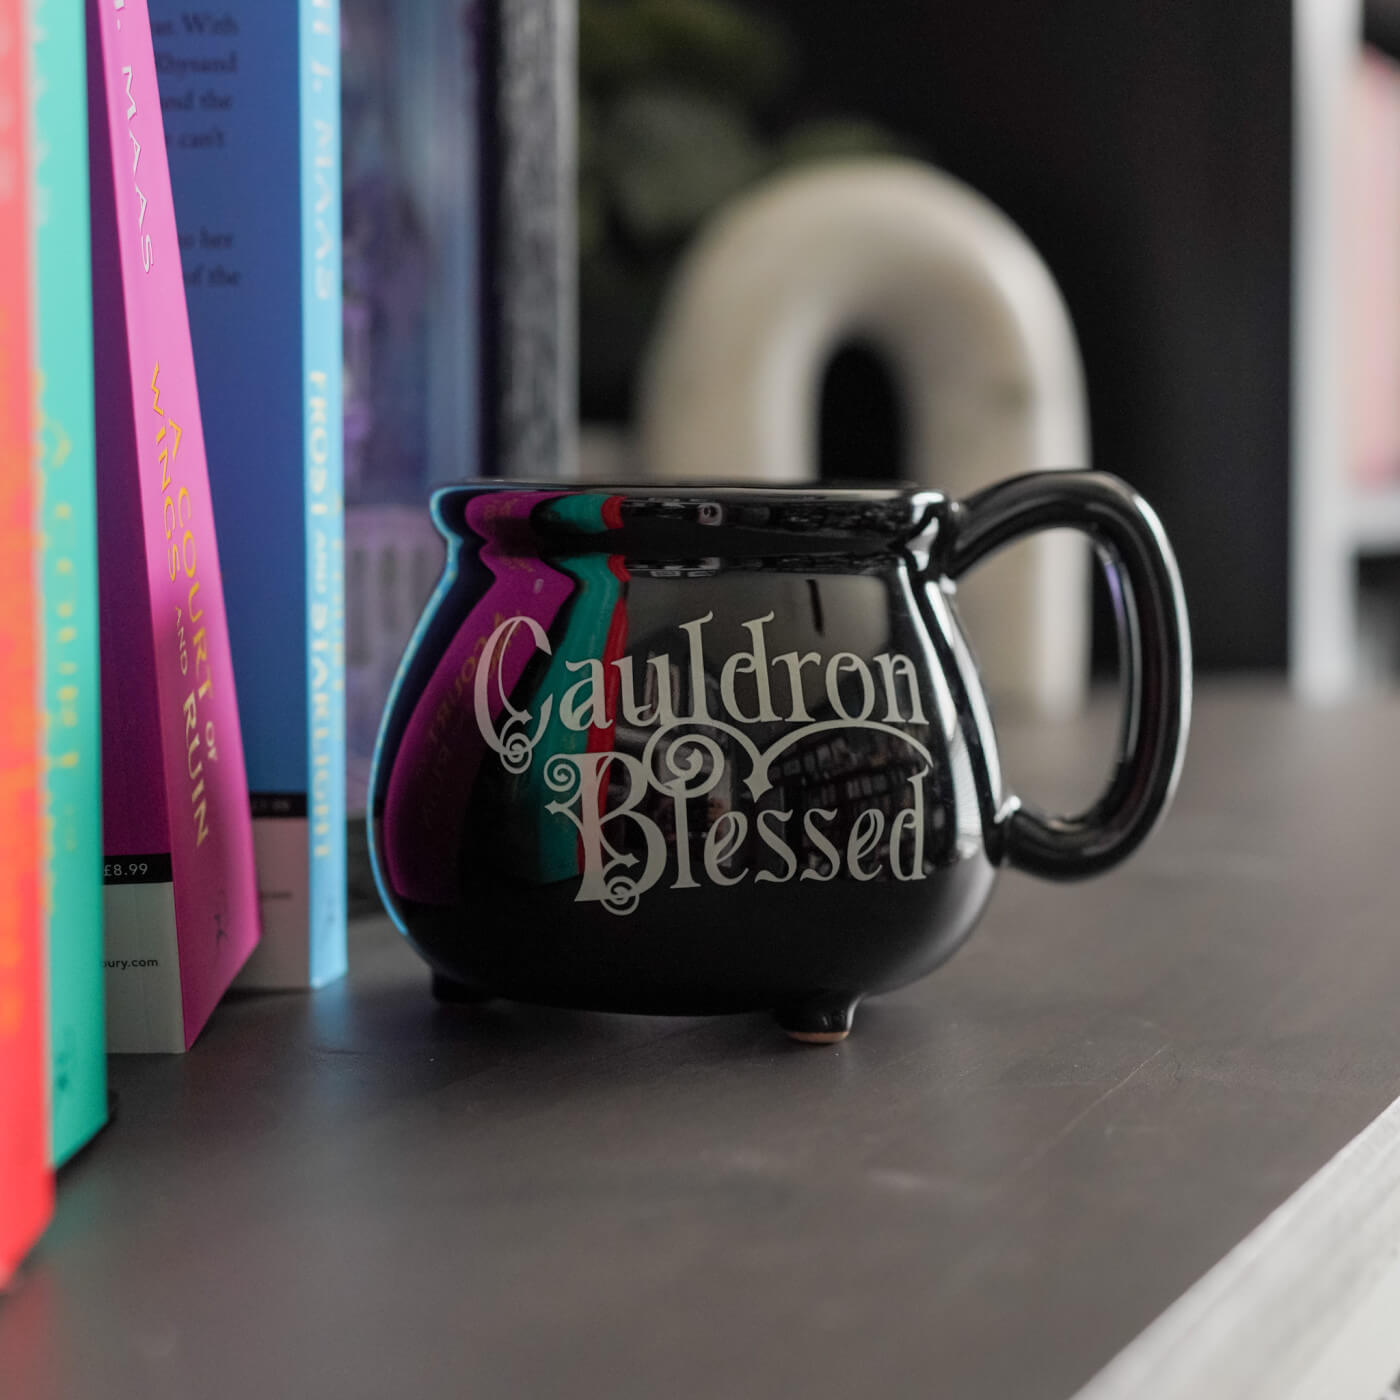 ACOTAR Cauldron replica as a mug that reads "Cauldron Blessed" in witchy script